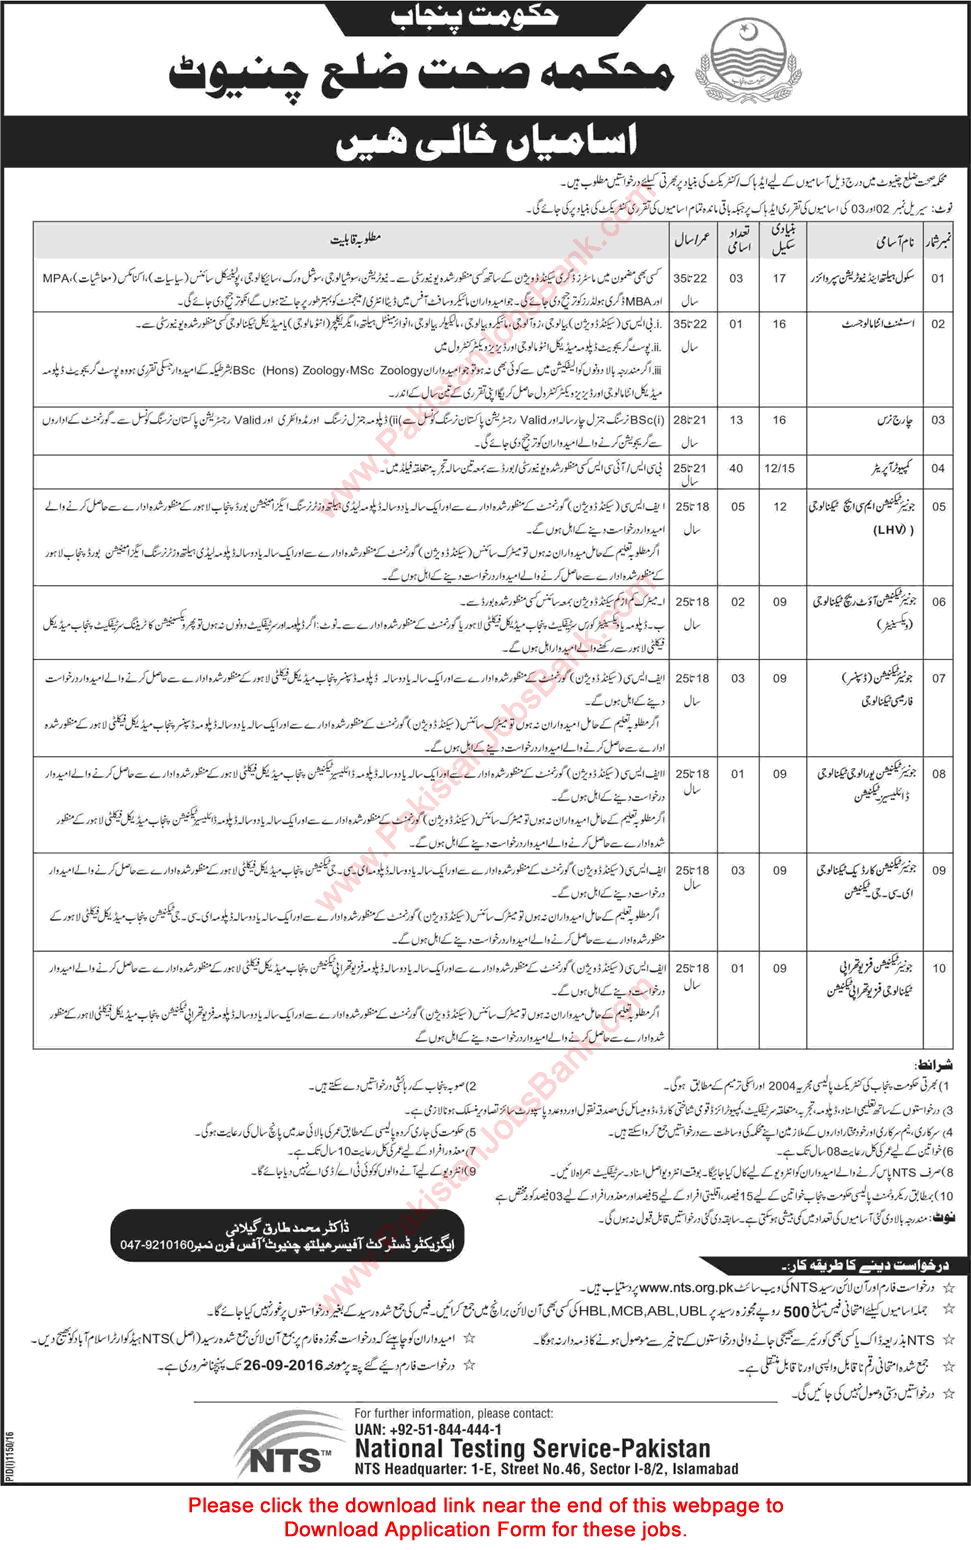 Health Department Chiniot Jobs 2016 September NTS Application Form Computer Operators, Nurses & Others Latest